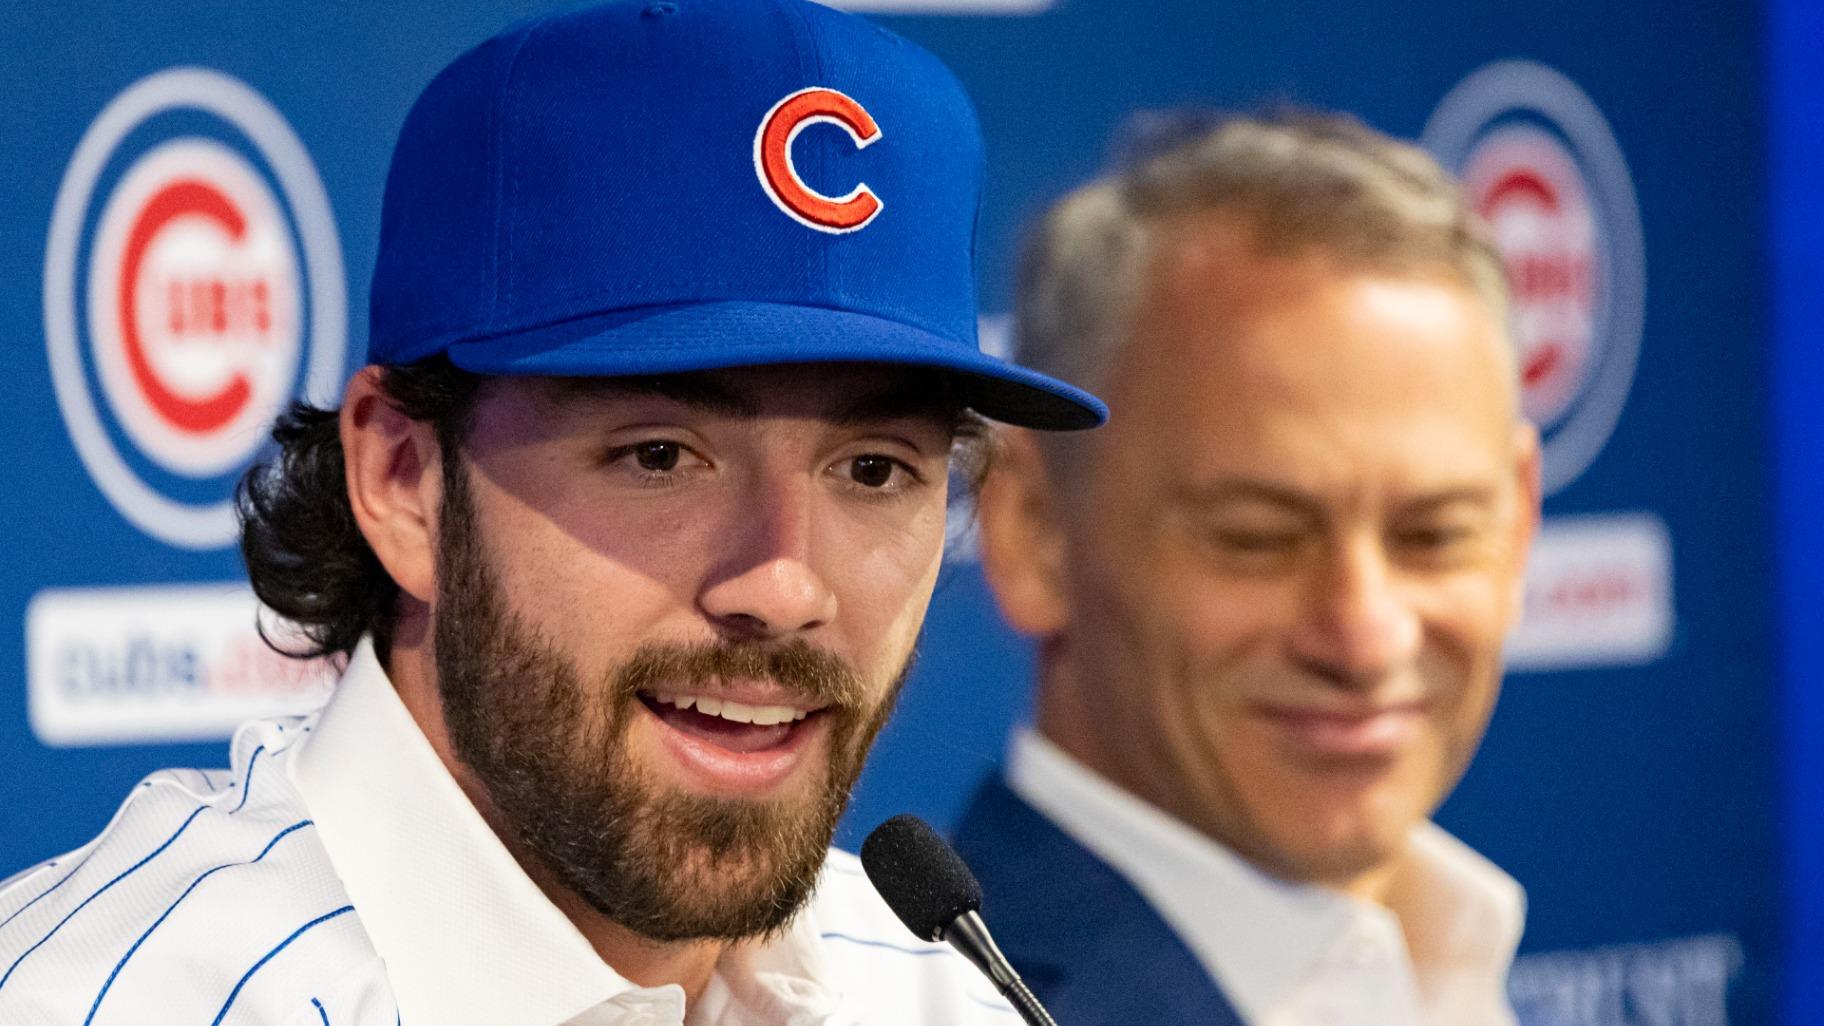 All-Star shortstop Dansby Swanson, alongside Jed Hoyer, Chicago Cubs president of baseball operations, speaks during baseball press conference Wednesday, Dec. 21, 2022, at Wrigley Field in Chicago. (Brian Cassella / Chicago Tribune via AP)